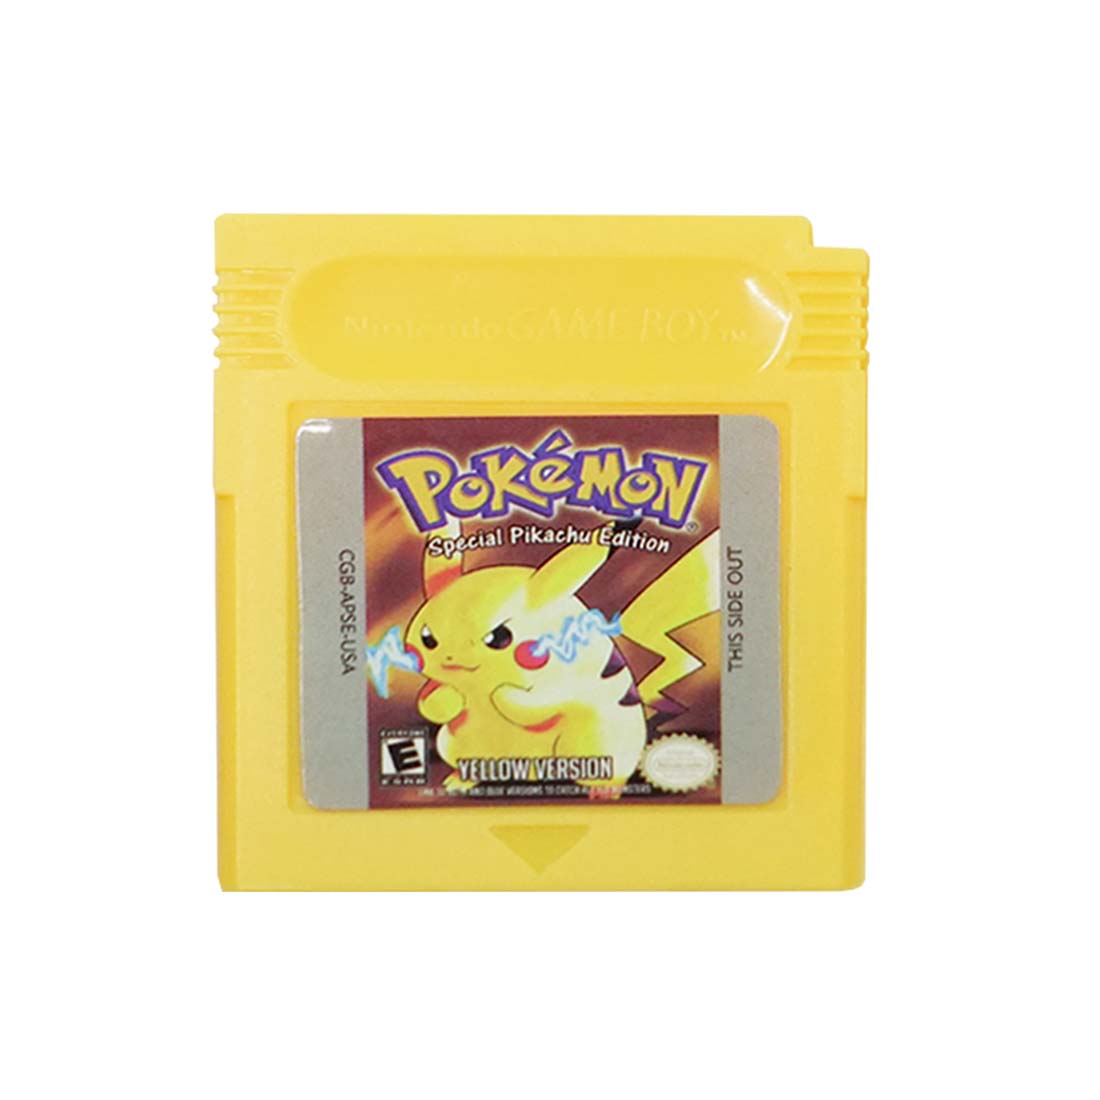 (Pre-Owned) Pokemon Special Pikachu Edition: Yellow Version - Gameboy Classic - لعبة - Store 974 | ستور ٩٧٤